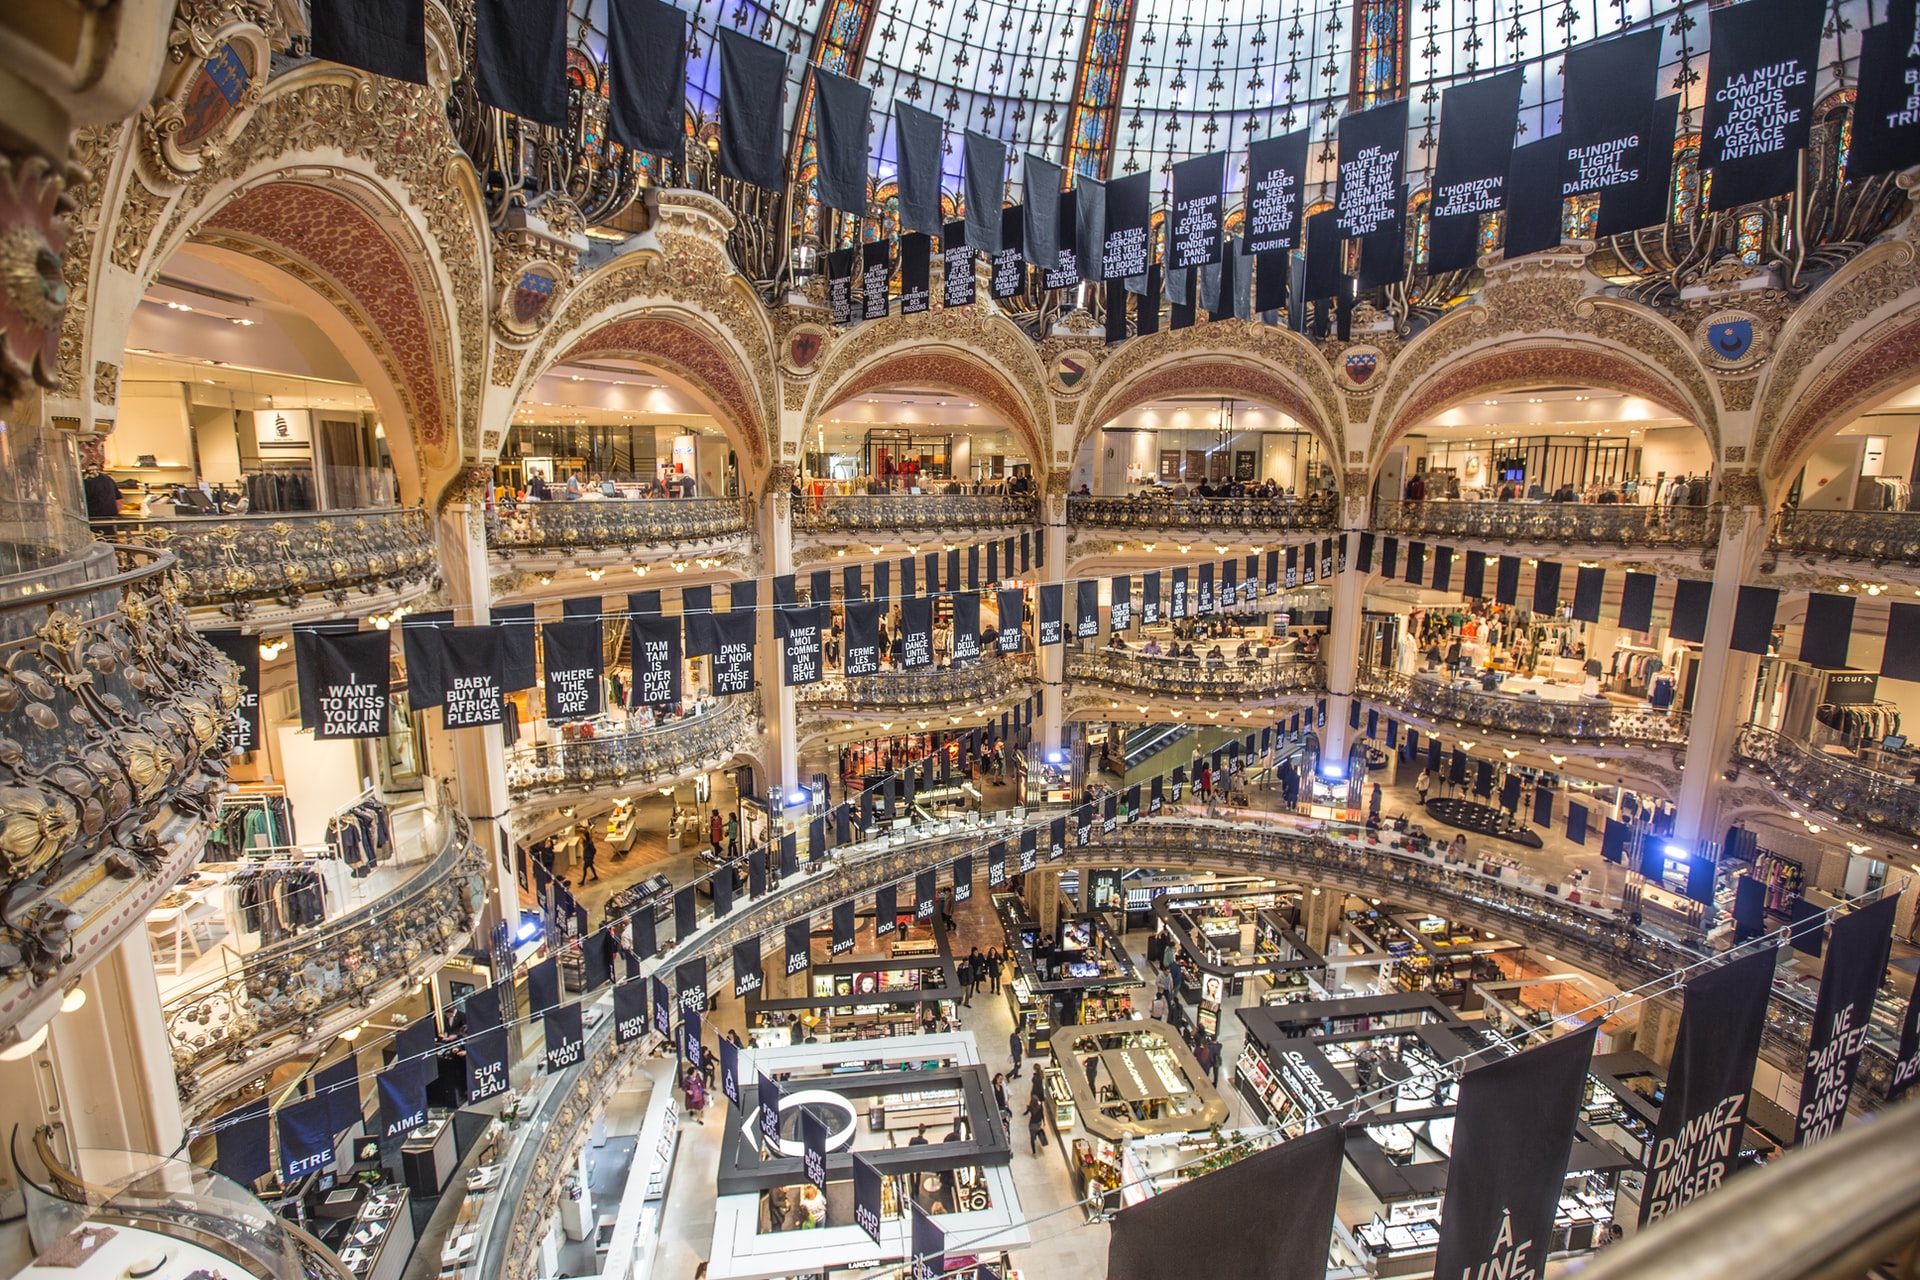 Galeries Lafayette own brands — Go for Good